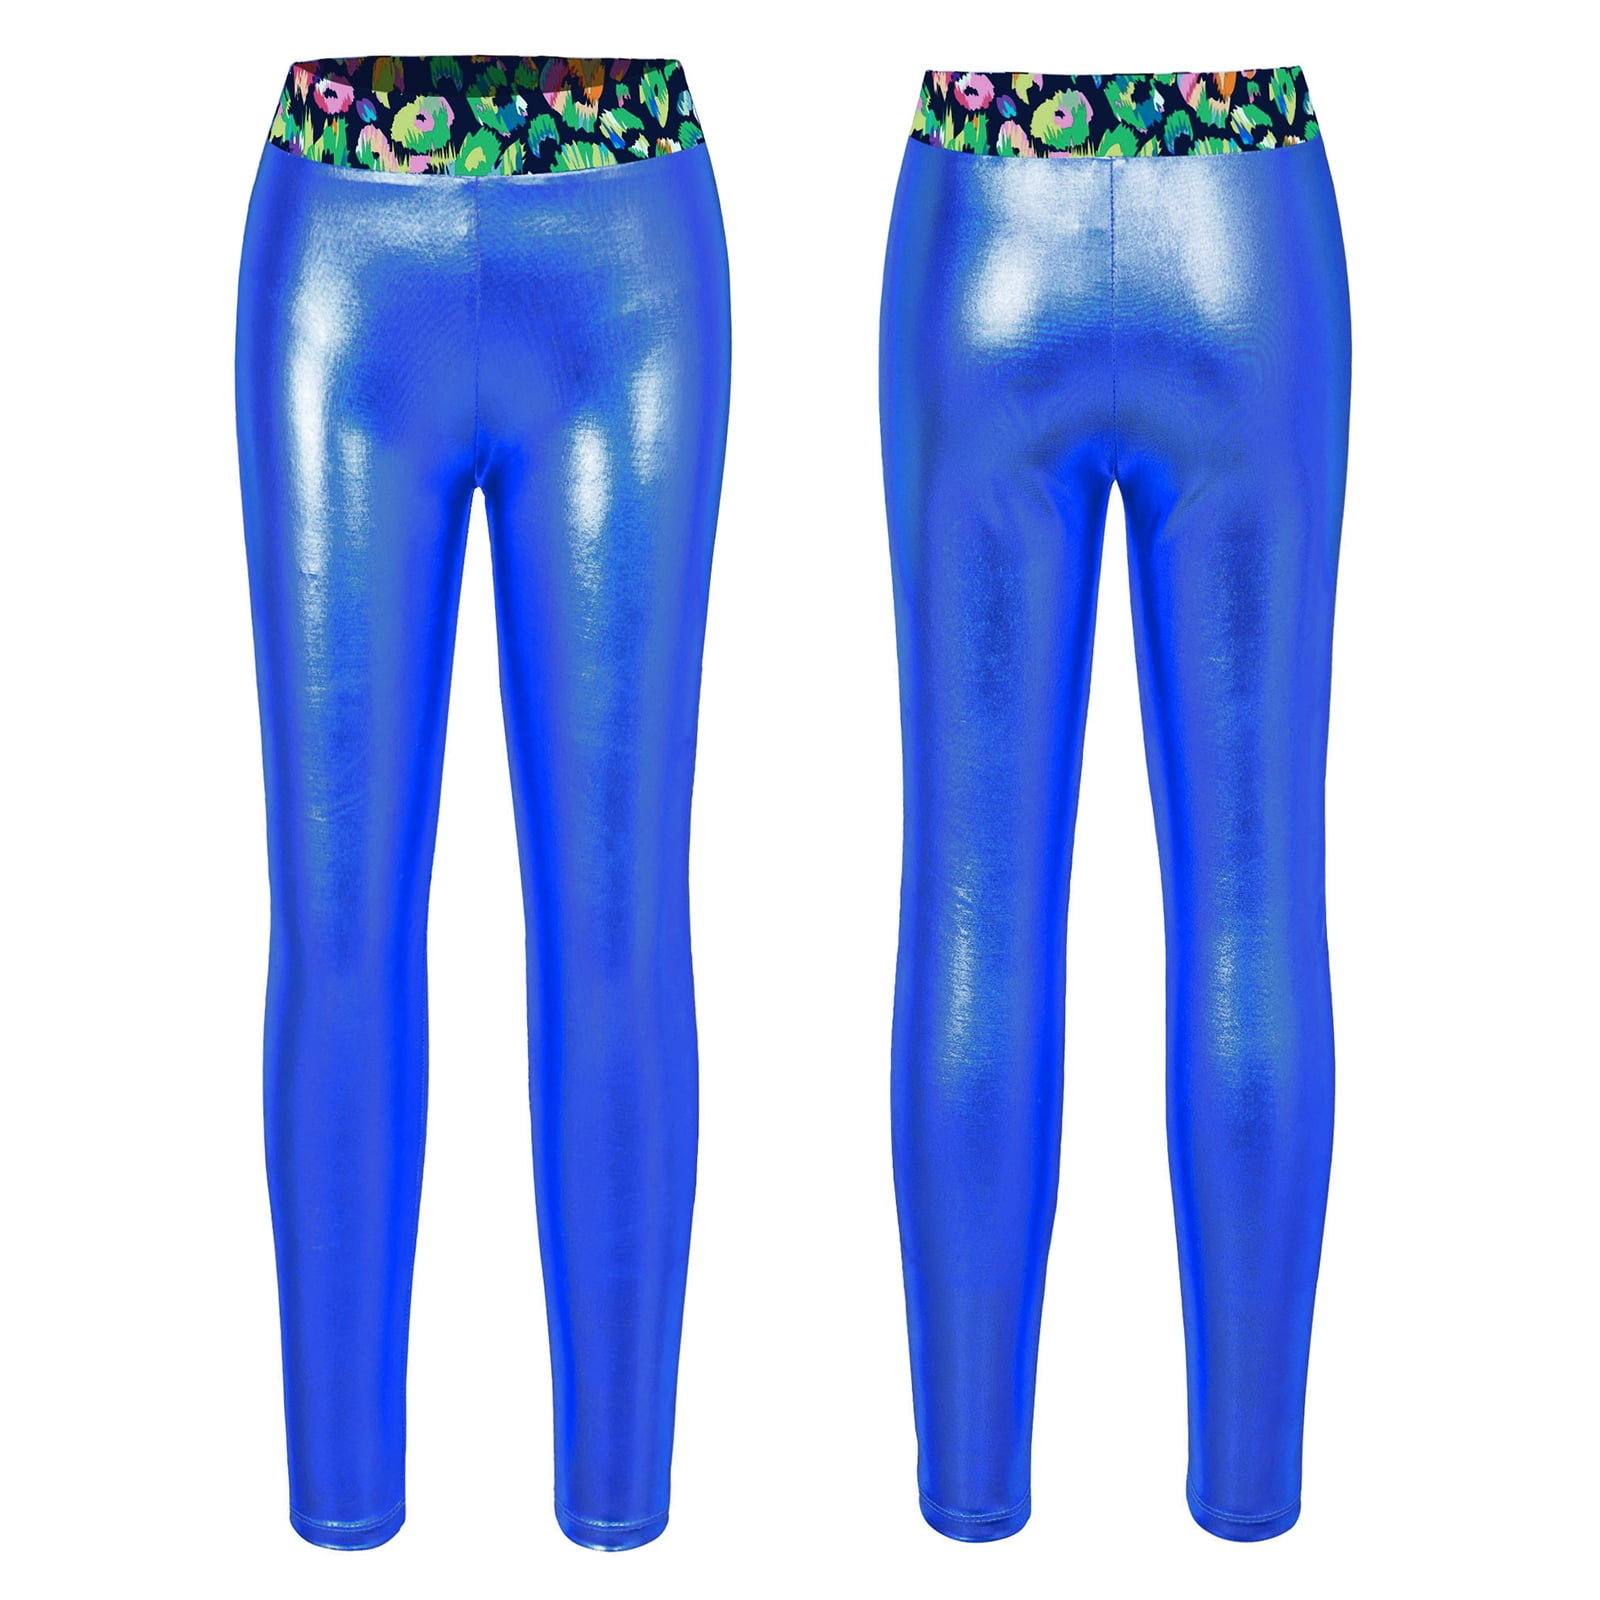 DPOIS Kids Girls Sparkly Figure Skating Pants High Waist Crystals